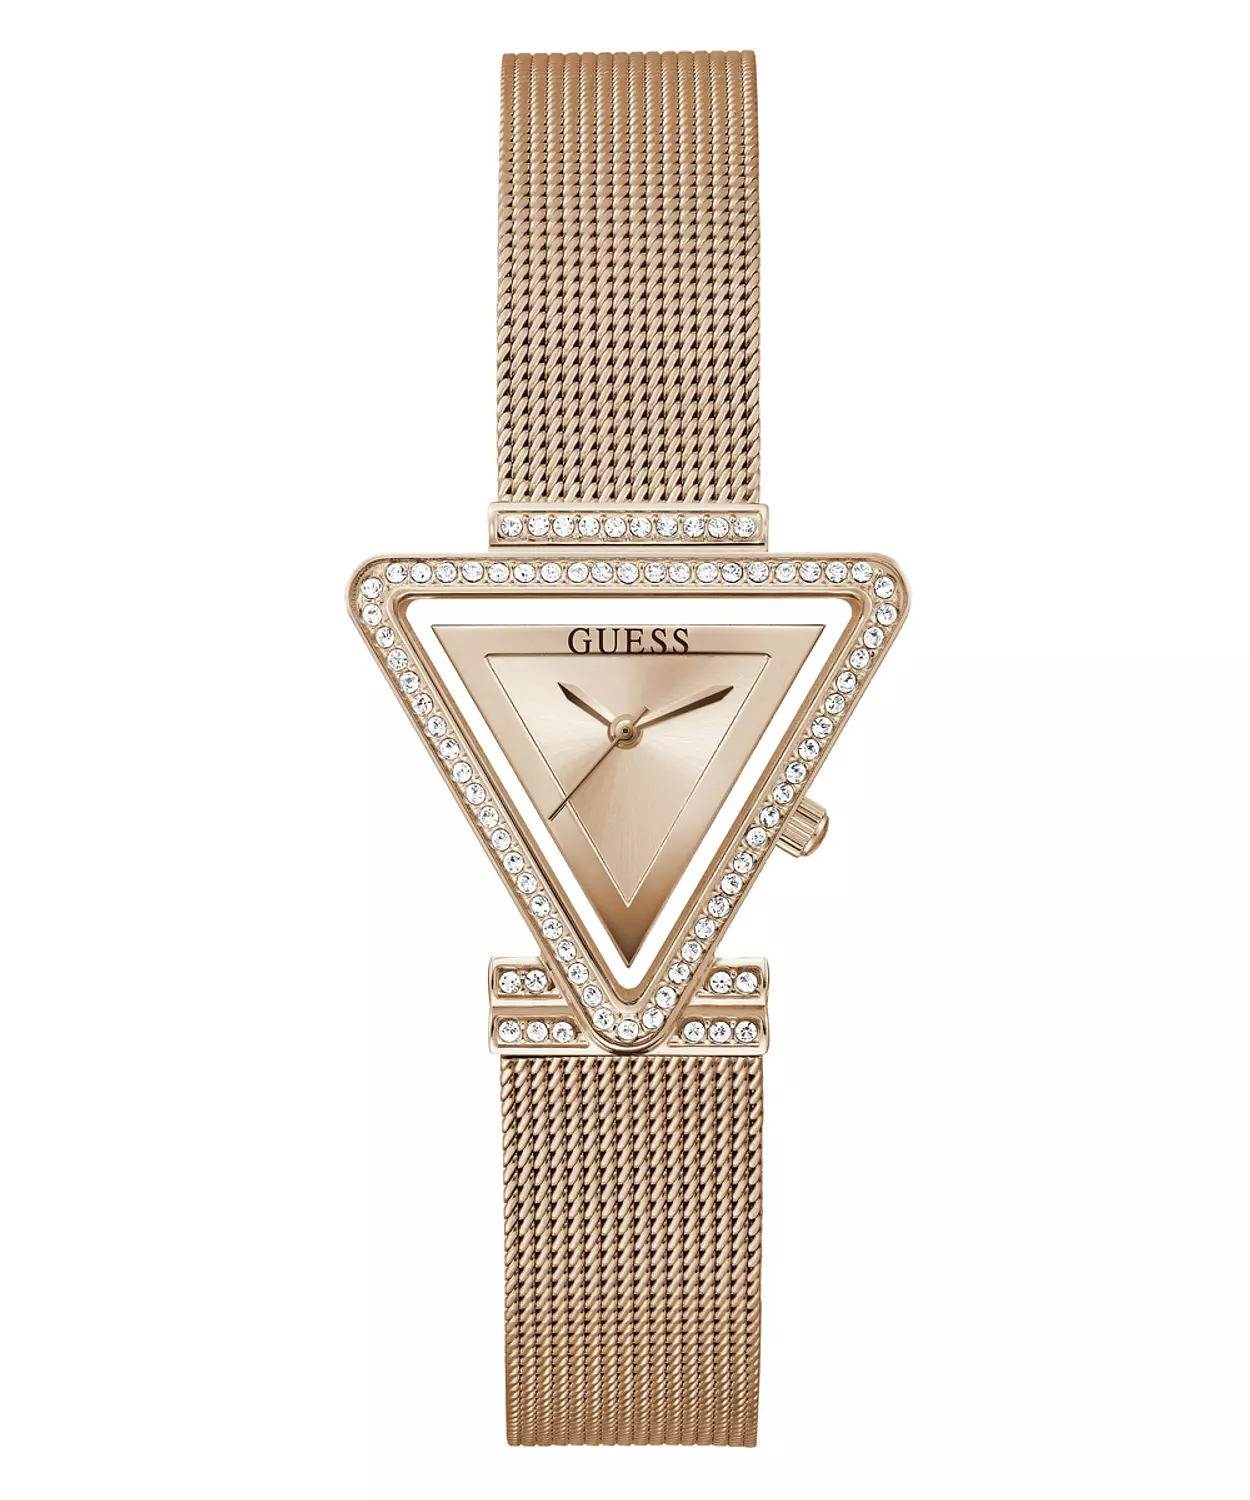 GUESS GW0508L3 ANALOG WATCH  For Women Rose Gold Stainless Steel/Mesh Polished Bracelet  0